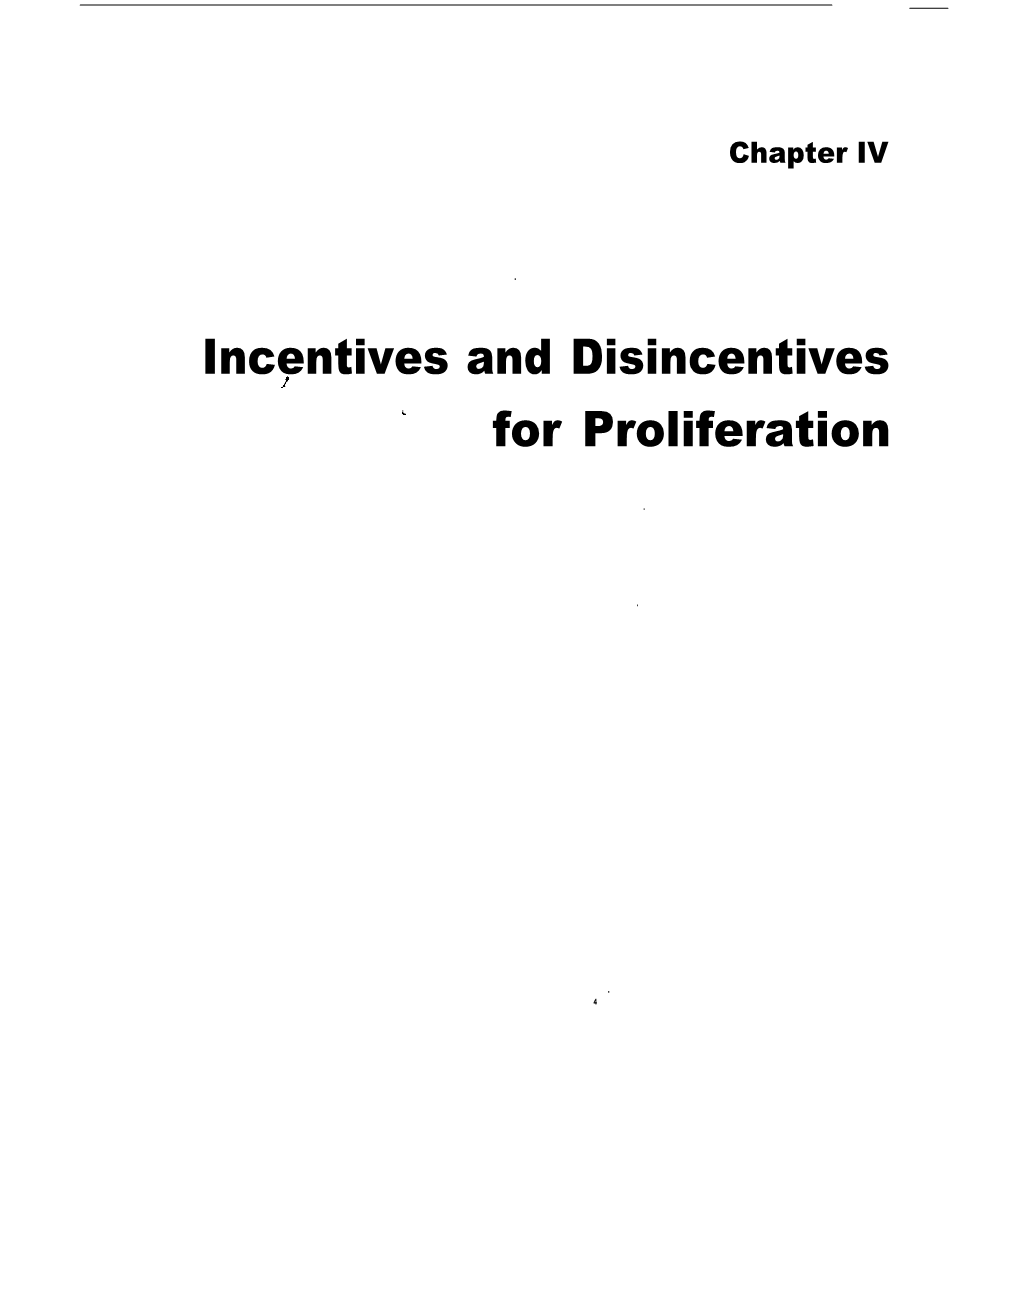 Incentives and Disincentives for Proliferation